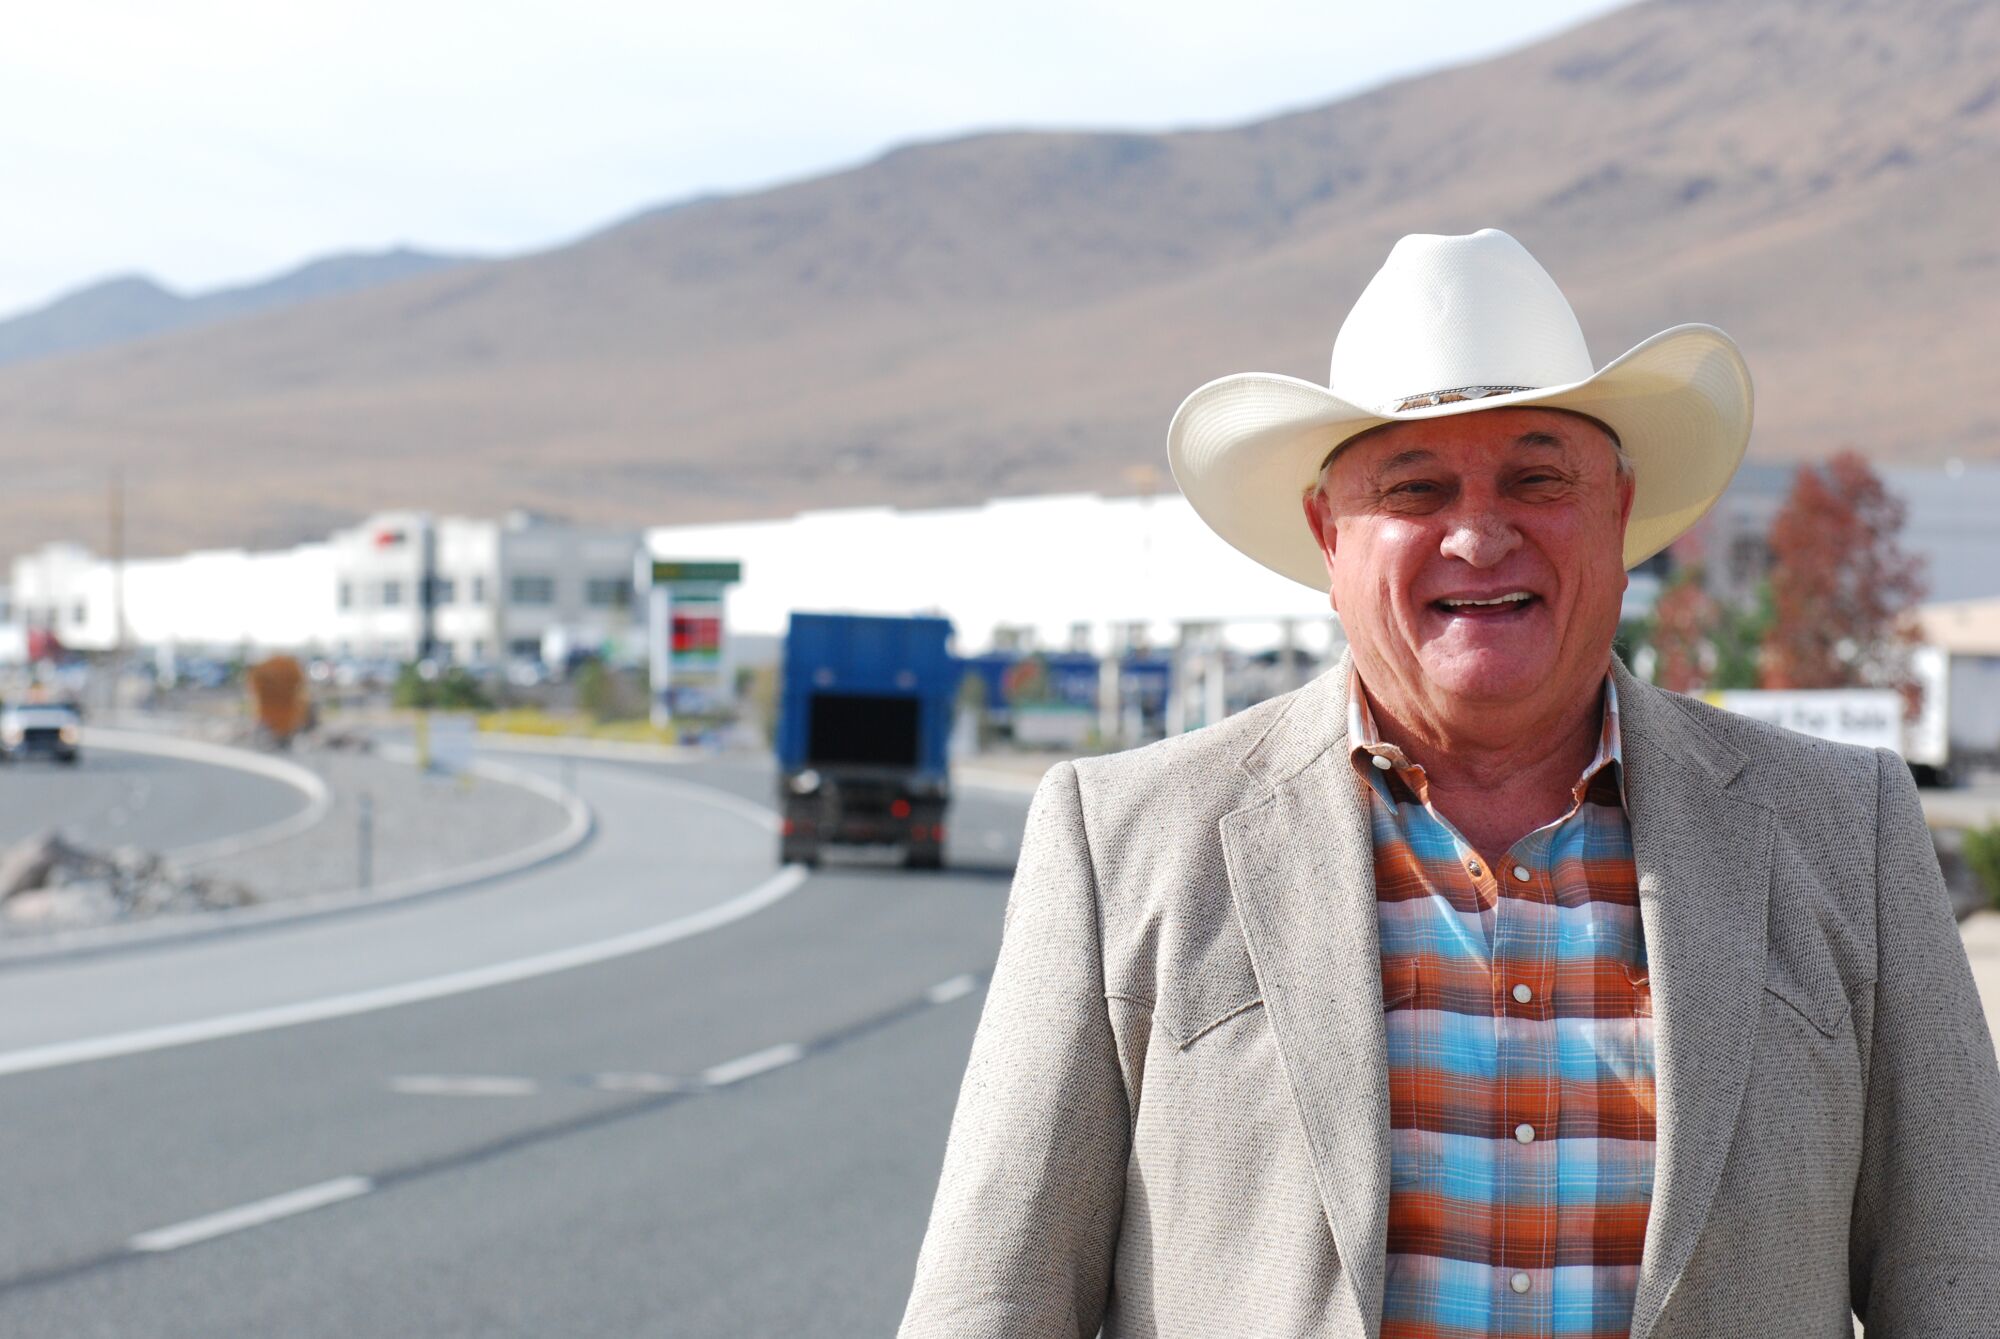 A man wearing a cowboy hat stands by a road and smiles.